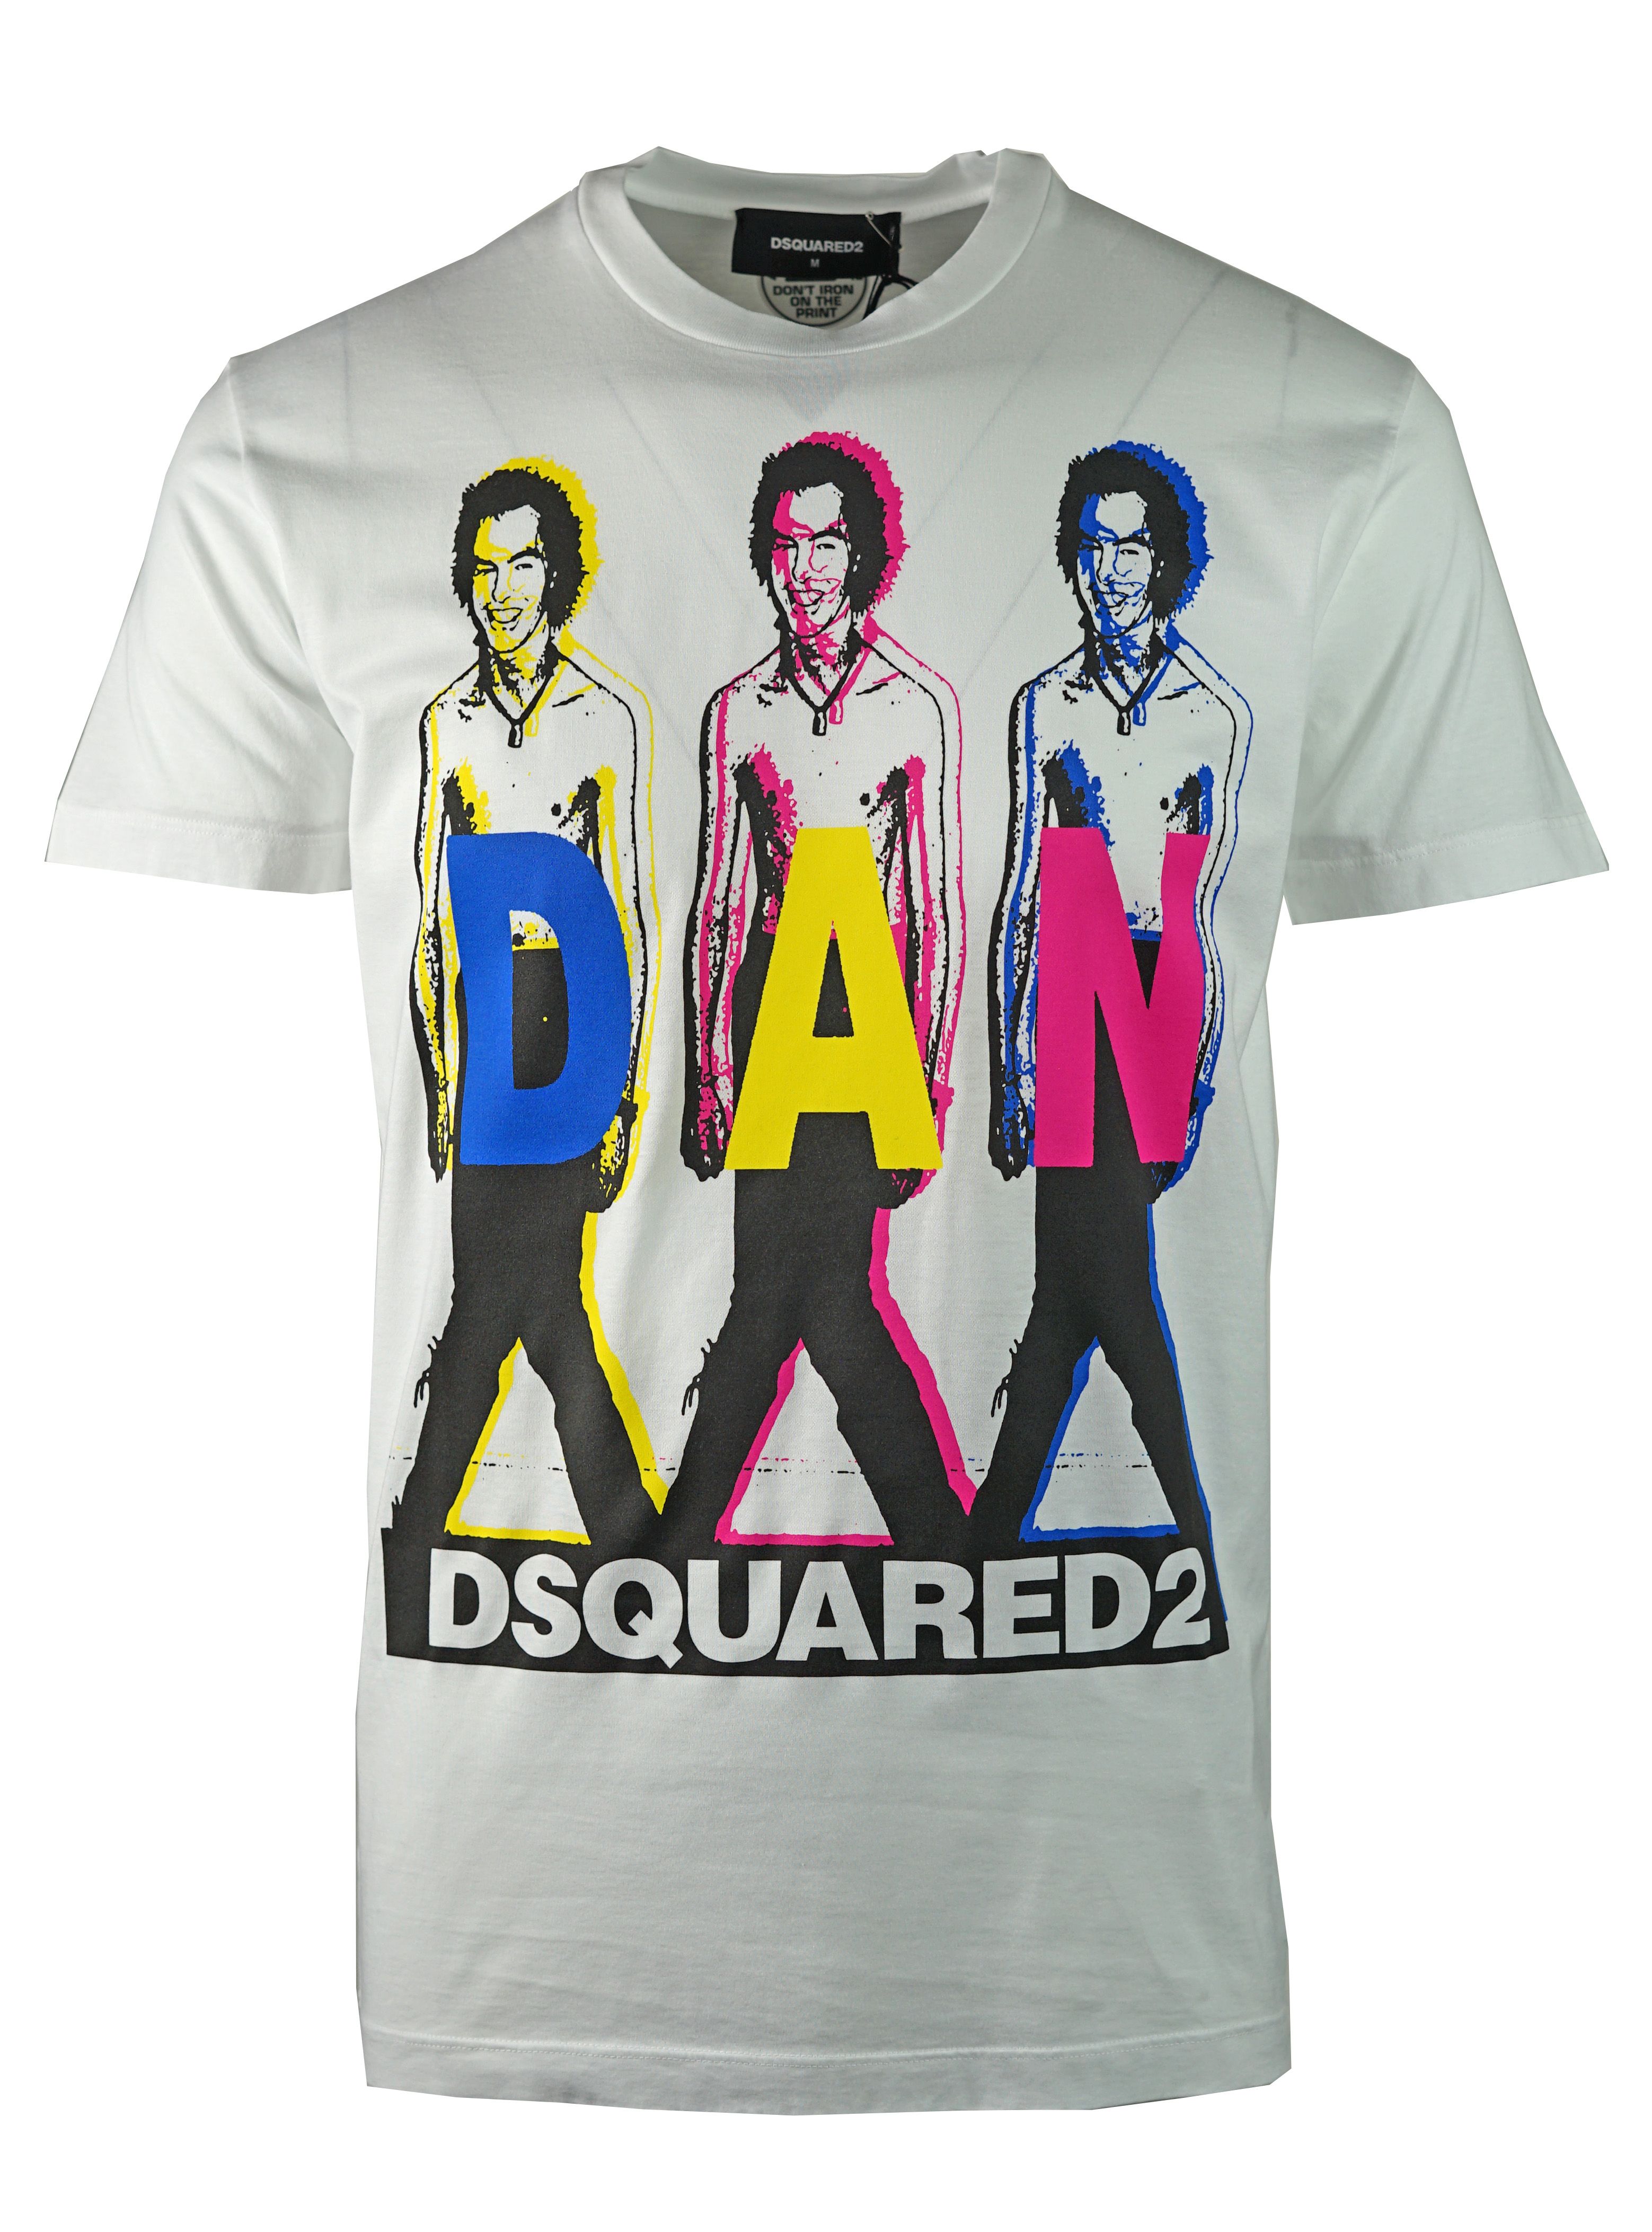 DSquared2 S74GD0498 S22427 100 T-Shirt. Round Crew Neck Tee. 100% Cotton. Short Sleeves. Large Branded Print On The Front. Ribbed Neck and Sleeve Endings